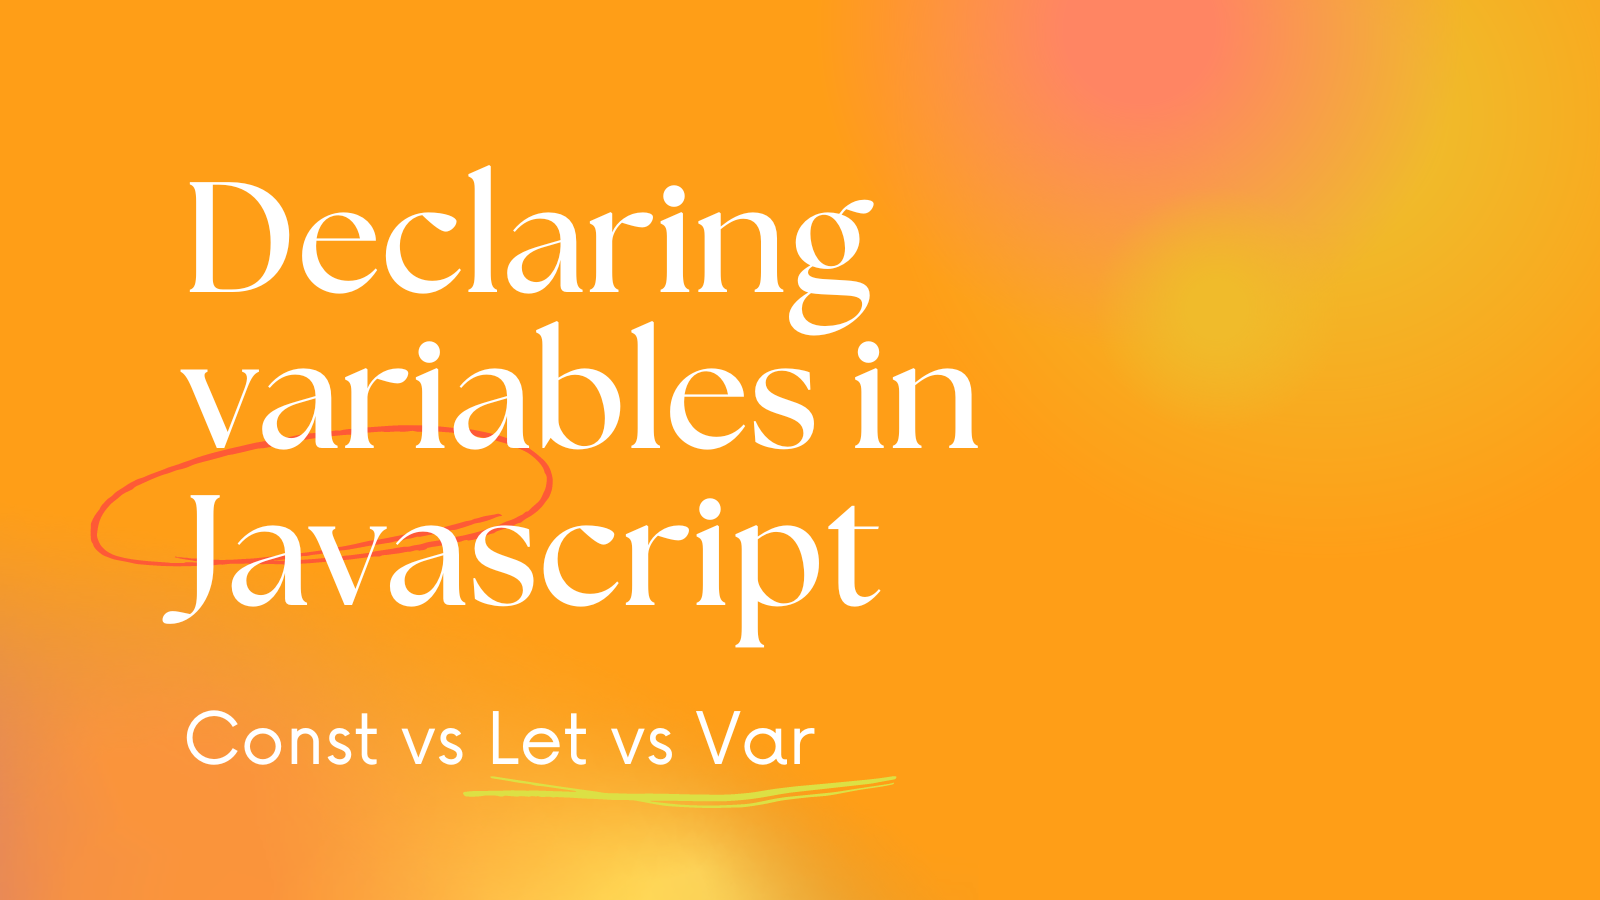 What is the difference between const, let and var in Javascript?